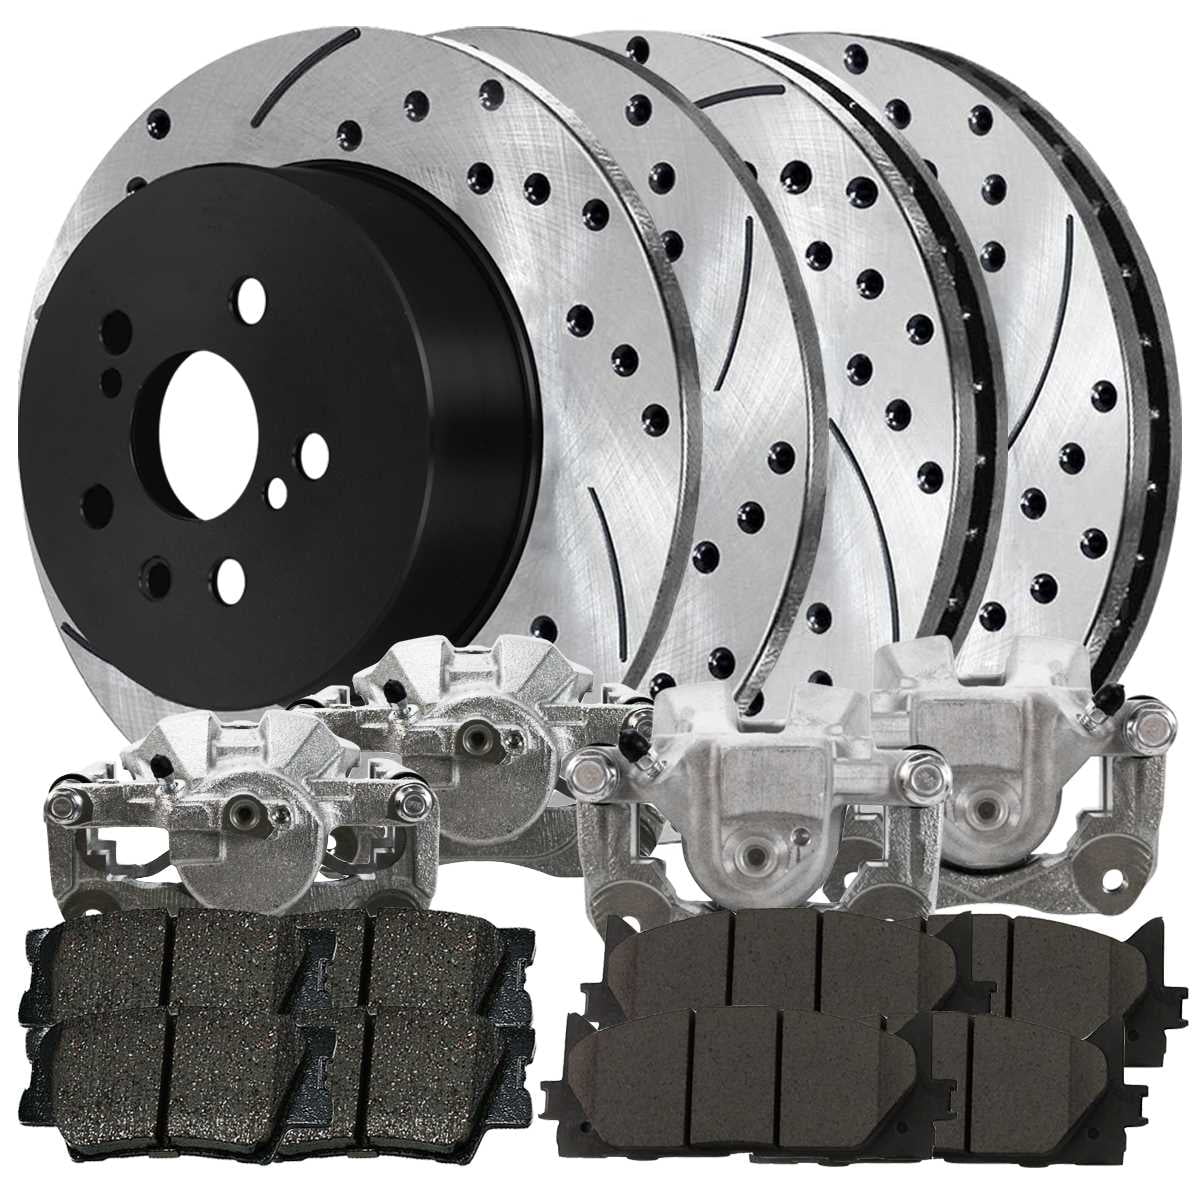 Stirling For Both Left and Right 2015 for Lincoln MKC Front Premium Quality Disc Brake Rotors And Ceramic Brake Pads - One Year Warranty